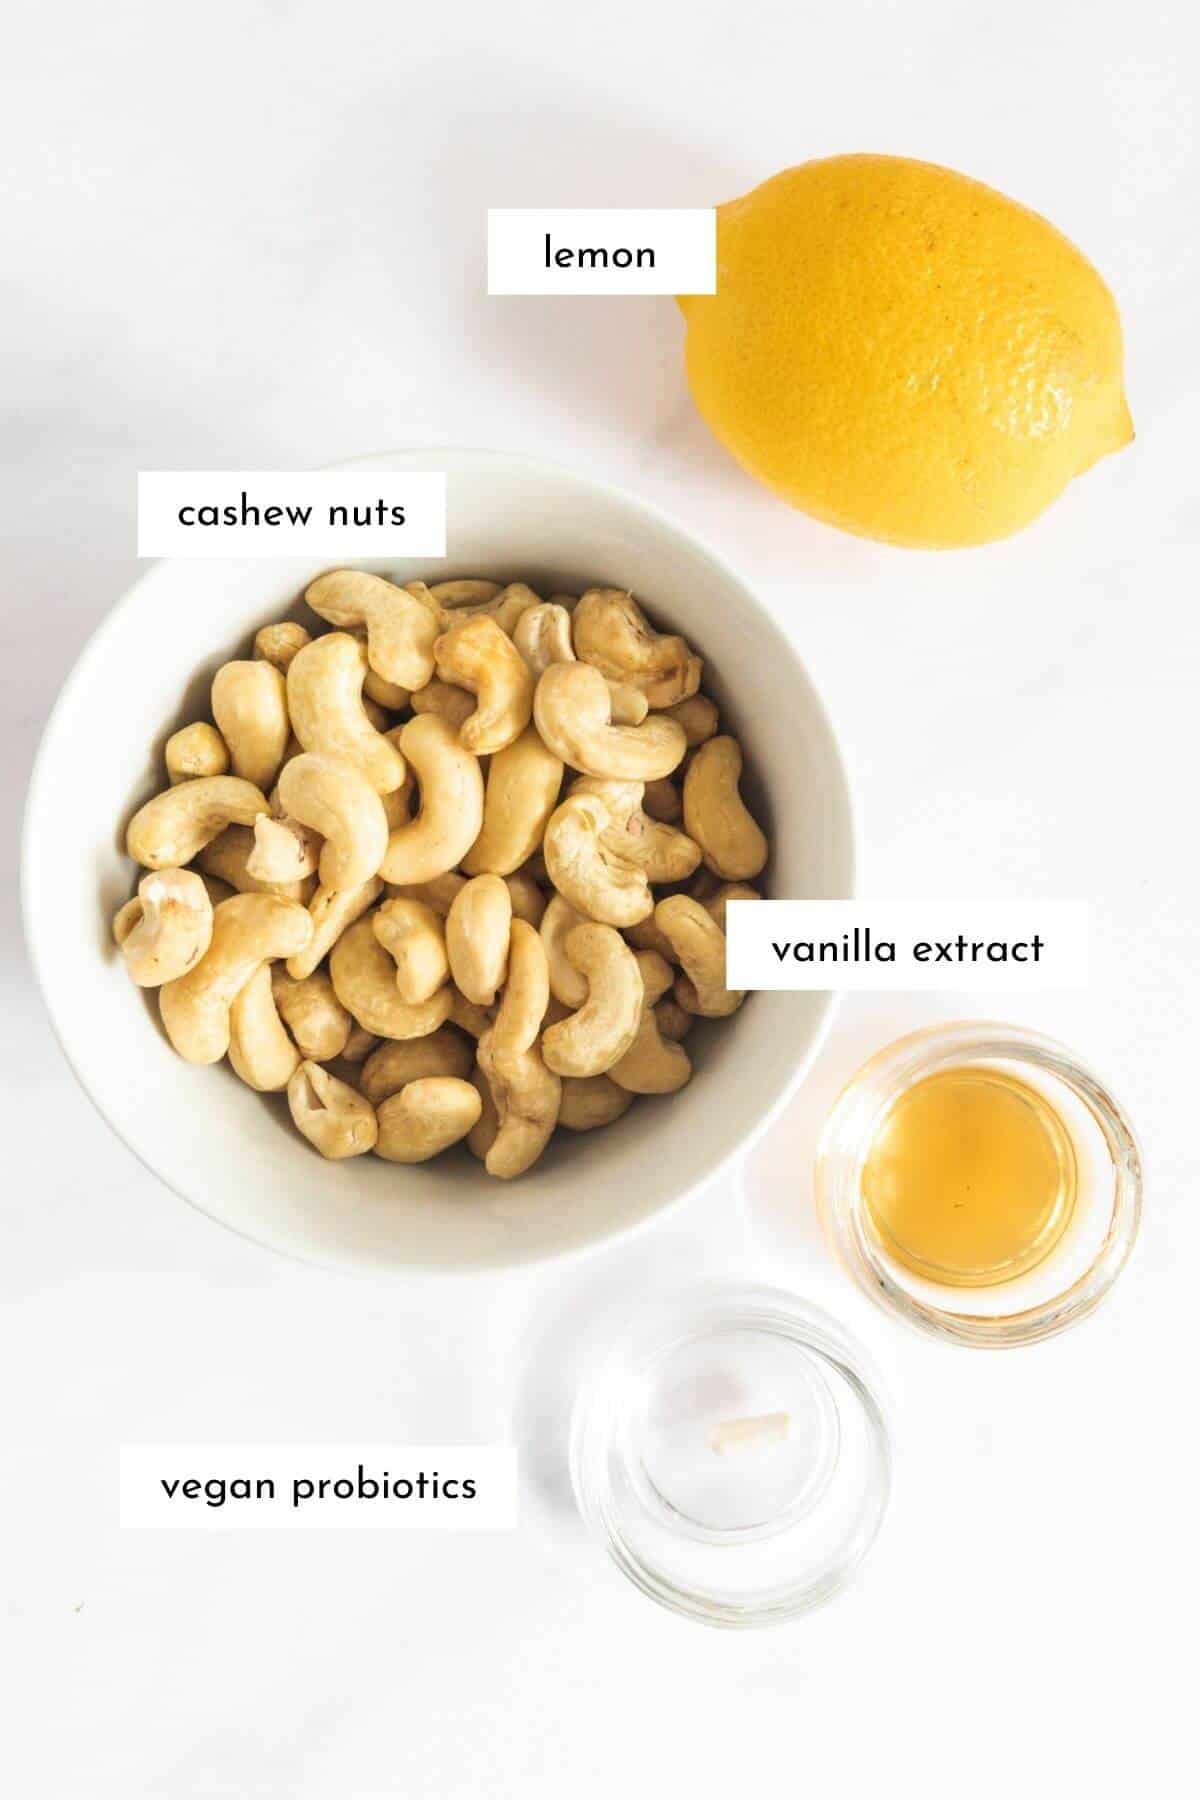 Cashew yogurt recipe ingredients are laid out on a white surface and labelled.